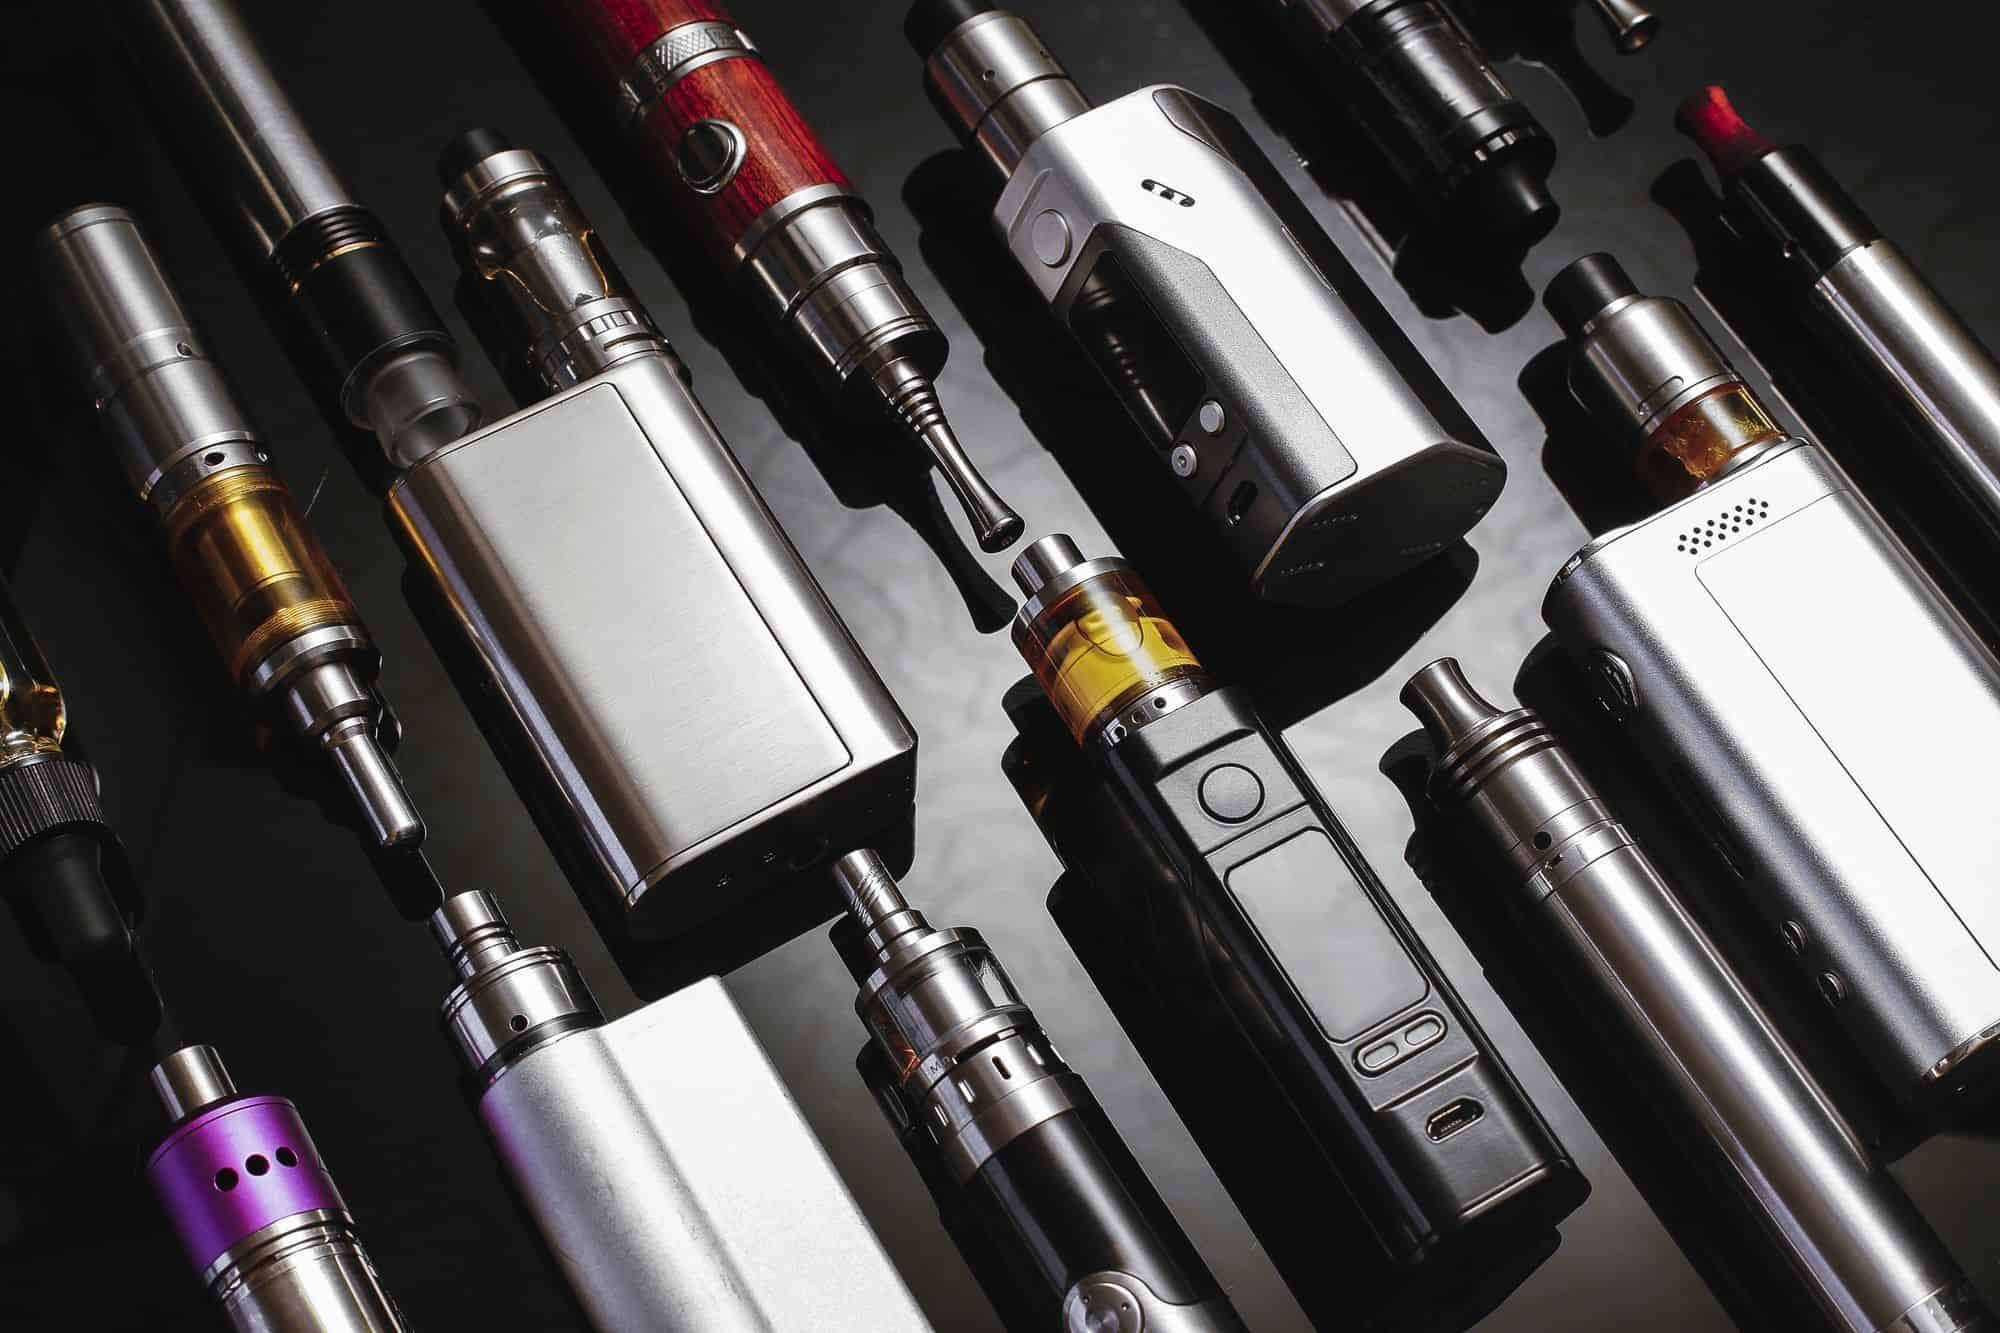 How to Choose a Vape That's Right for You